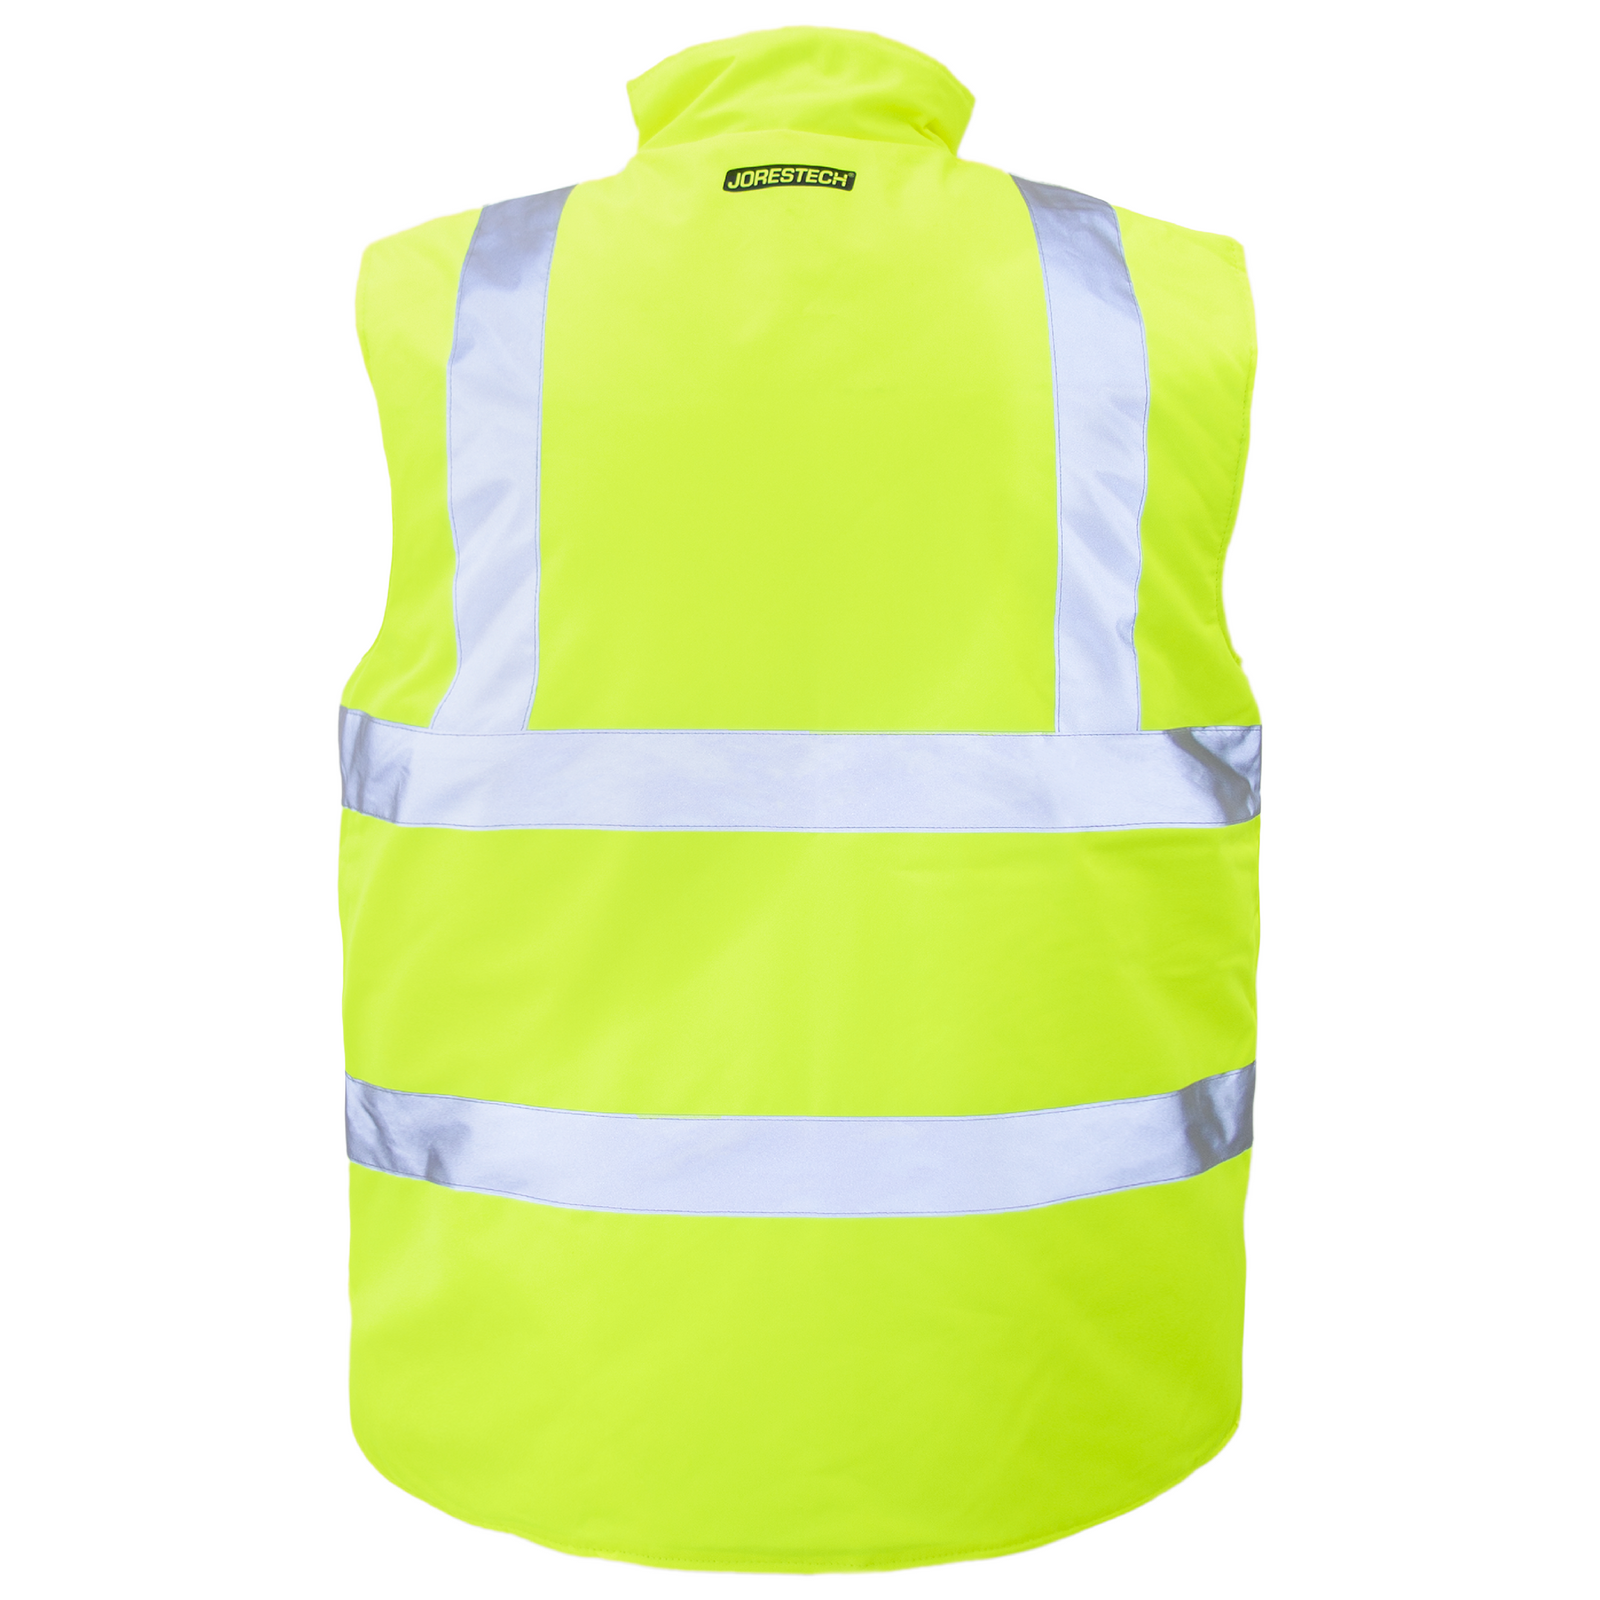 Features the yellow side of the ANSI compliant insulated reversible safety vest